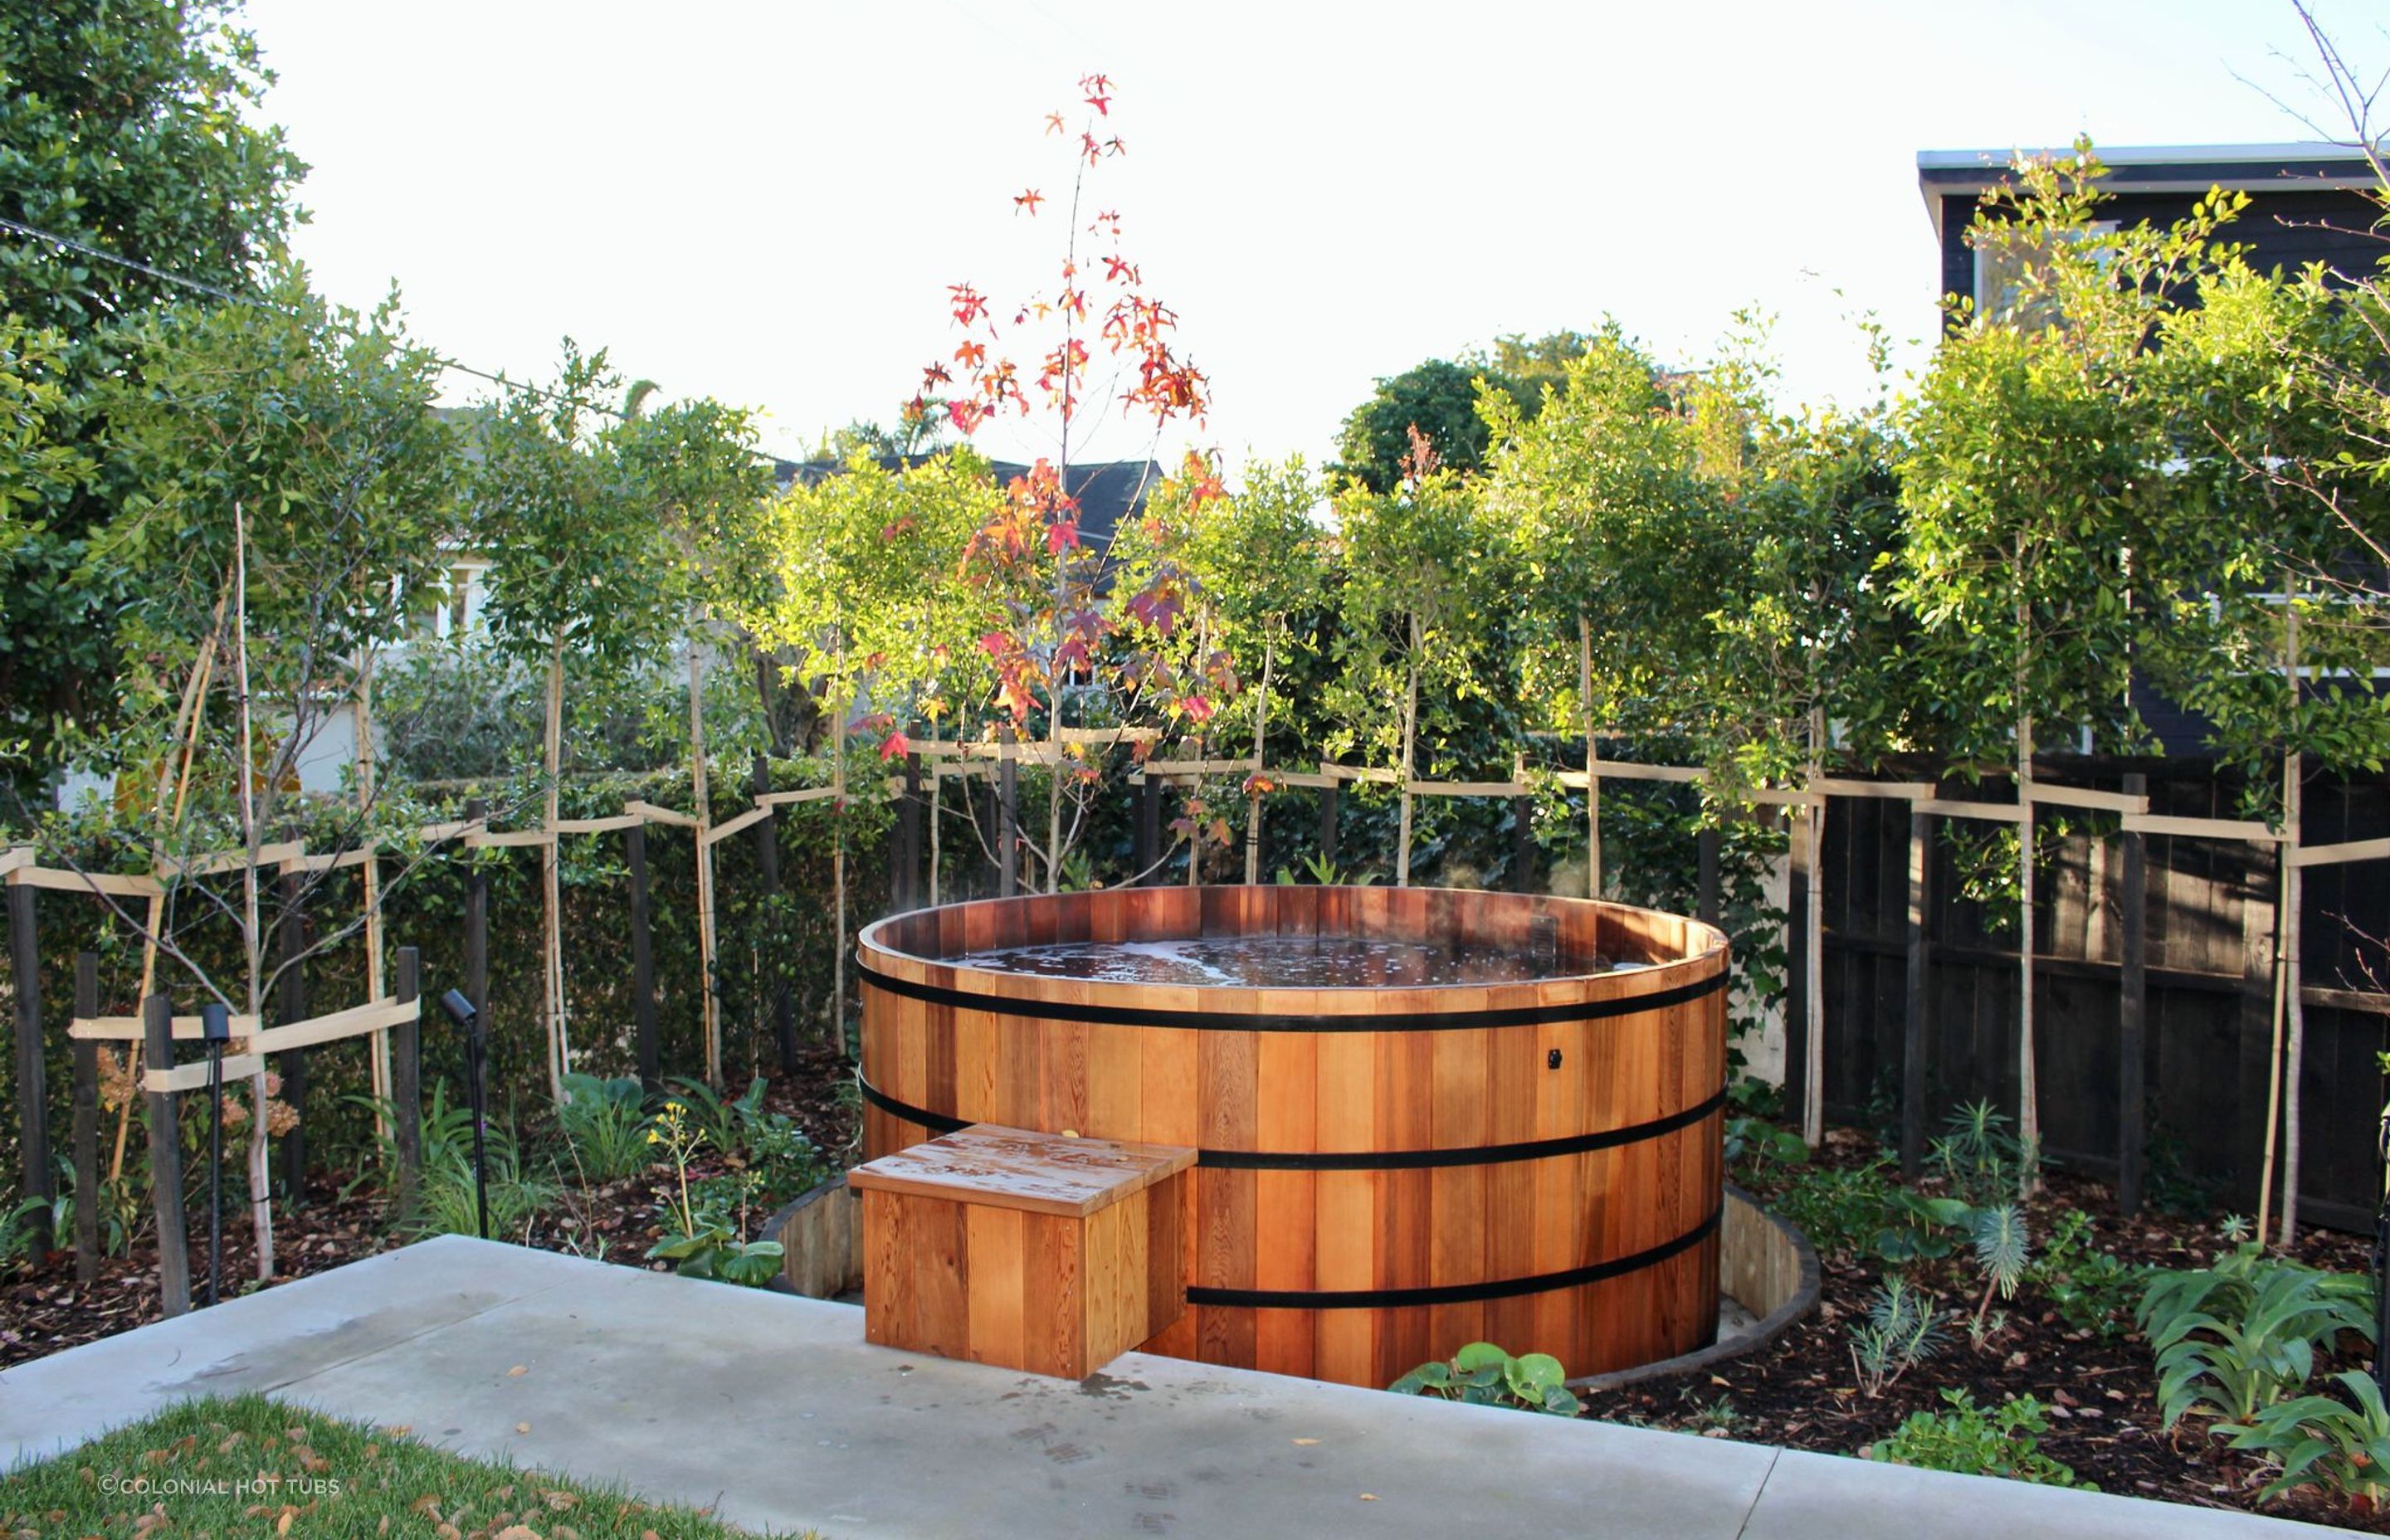 The 8 Foot Cedar Hot Tub can accommodate 14 people making it great for social occasions.